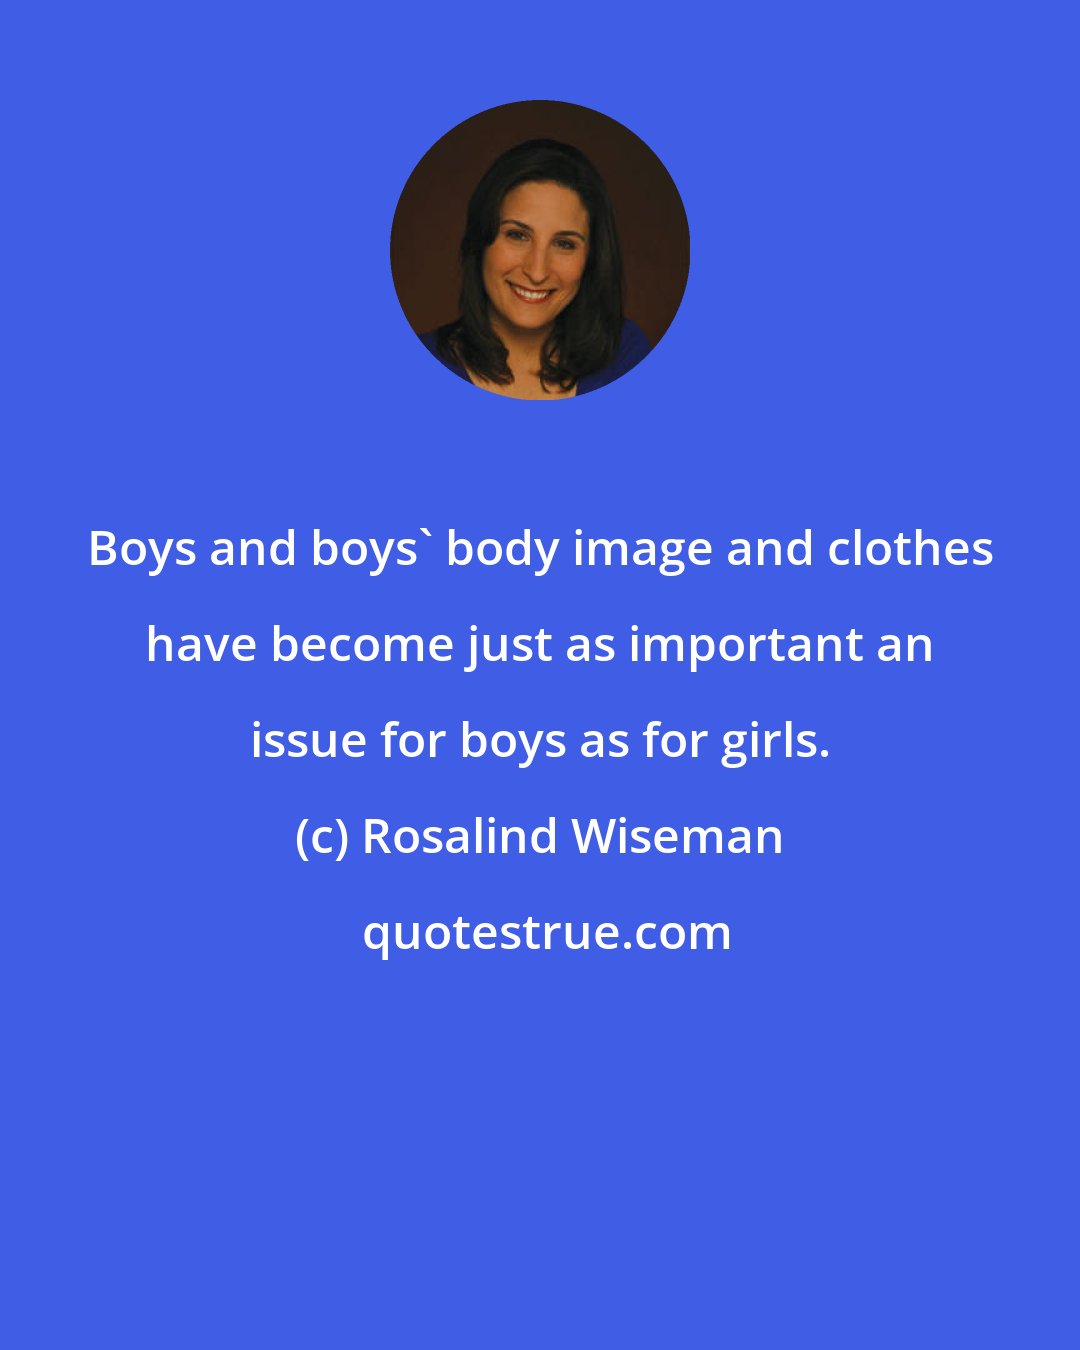 Rosalind Wiseman: Boys and boys' body image and clothes have become just as important an issue for boys as for girls.